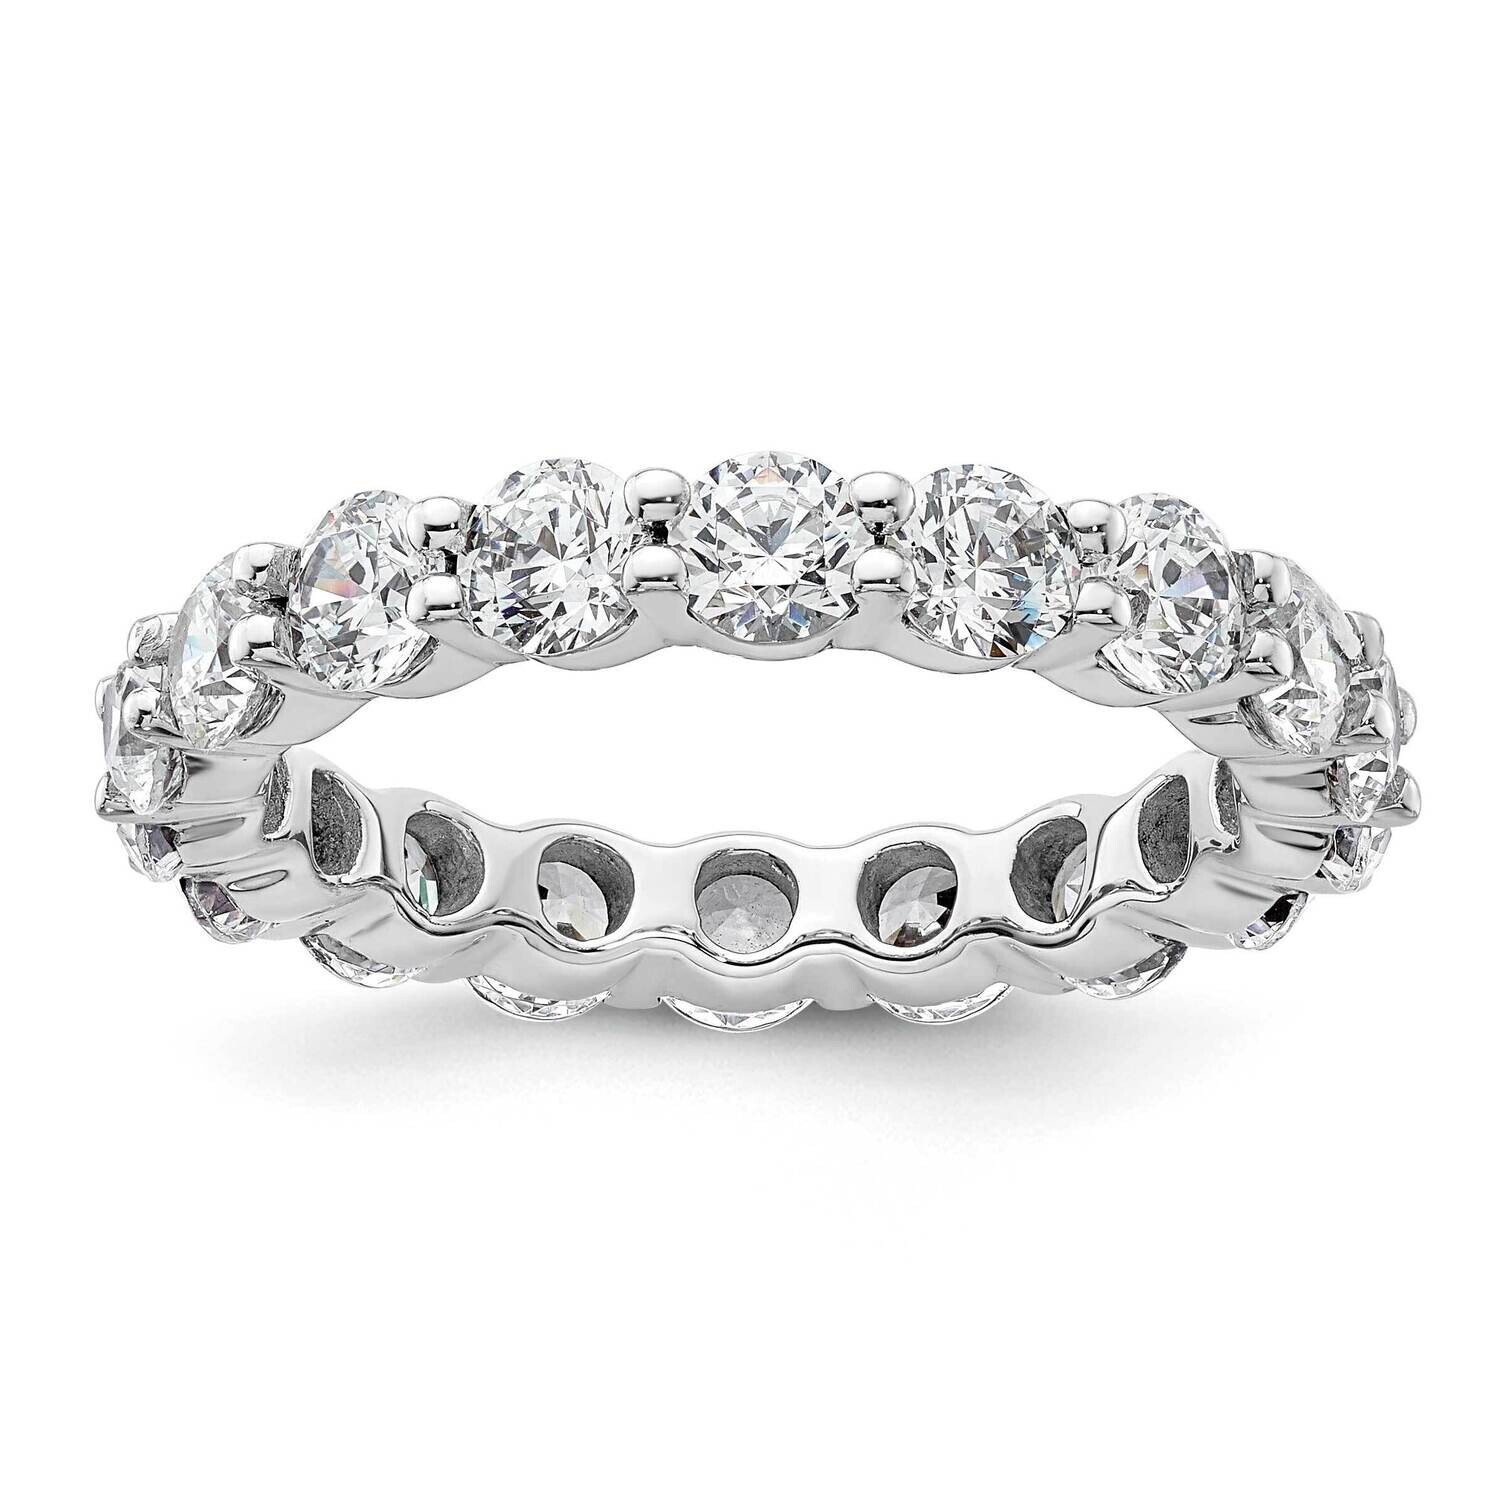 Polished Shared Prong 4 Carat Diamond Complete Eternity Band 14k White Gold ET0001-400-9W4